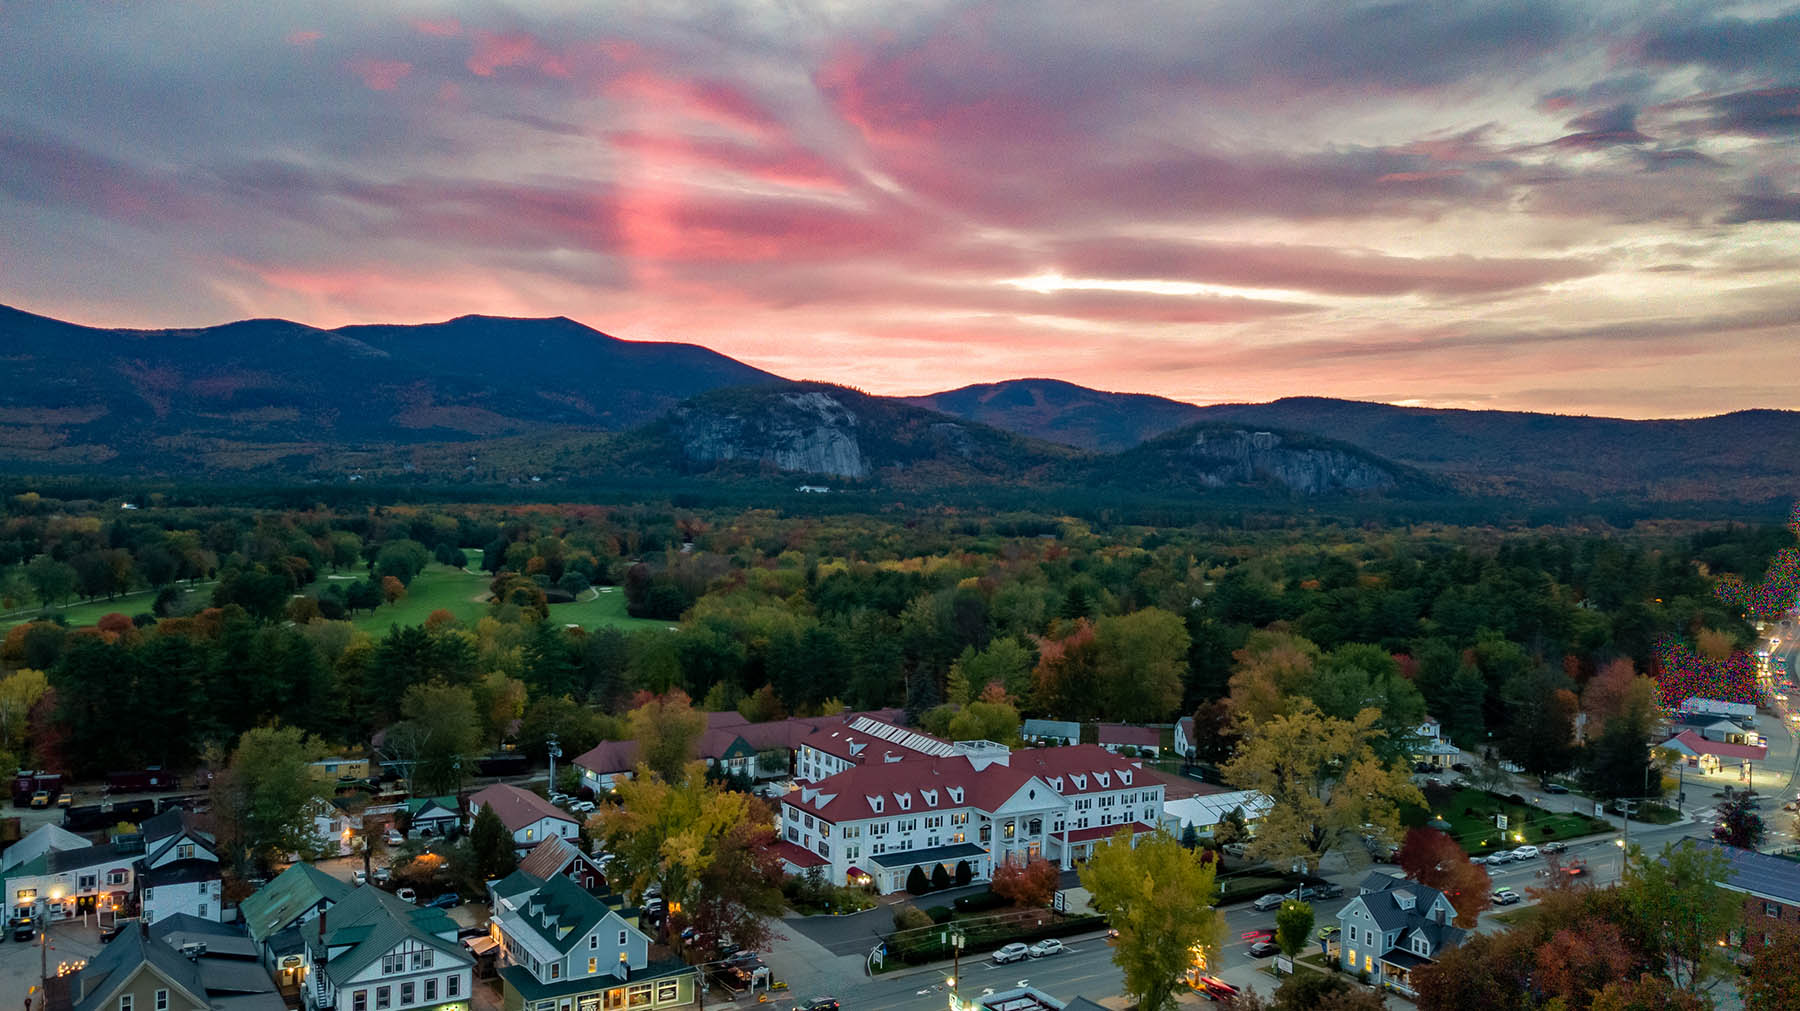 Image of North Conway Village from above